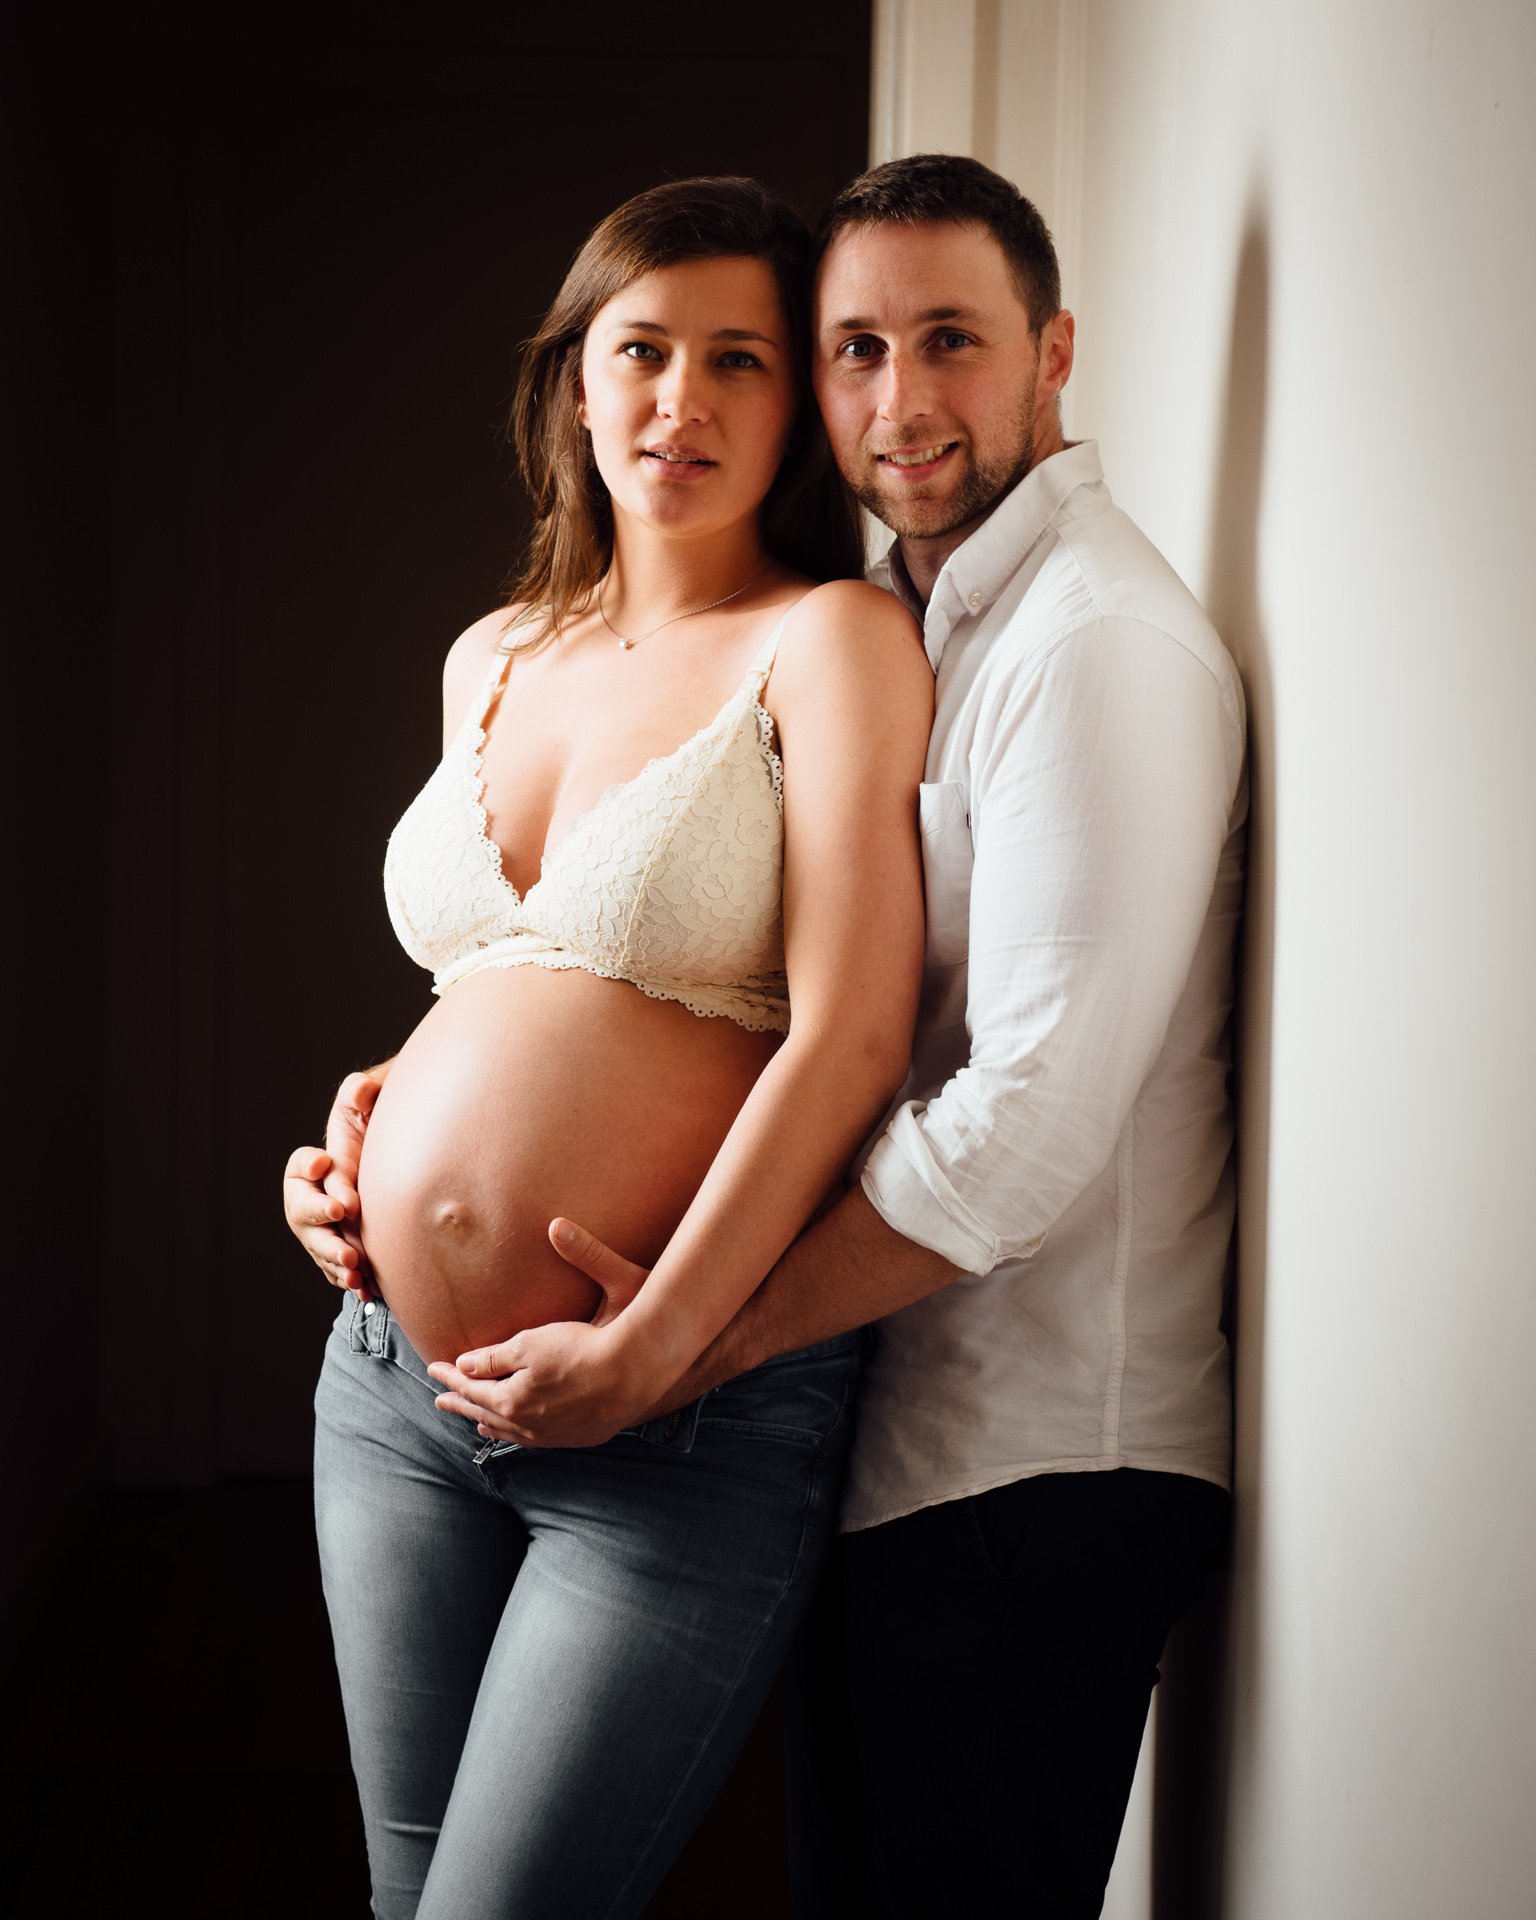 Capturing the beauty of pregnancy together 🤍

...

#couplematernityphotoshoot #couplematernityphotoshootsydney #familymaternityphotography #maternityphotographysydney #maternityphotoshoot #maternityphotoshootsydney #familymaternityphotographer #stud